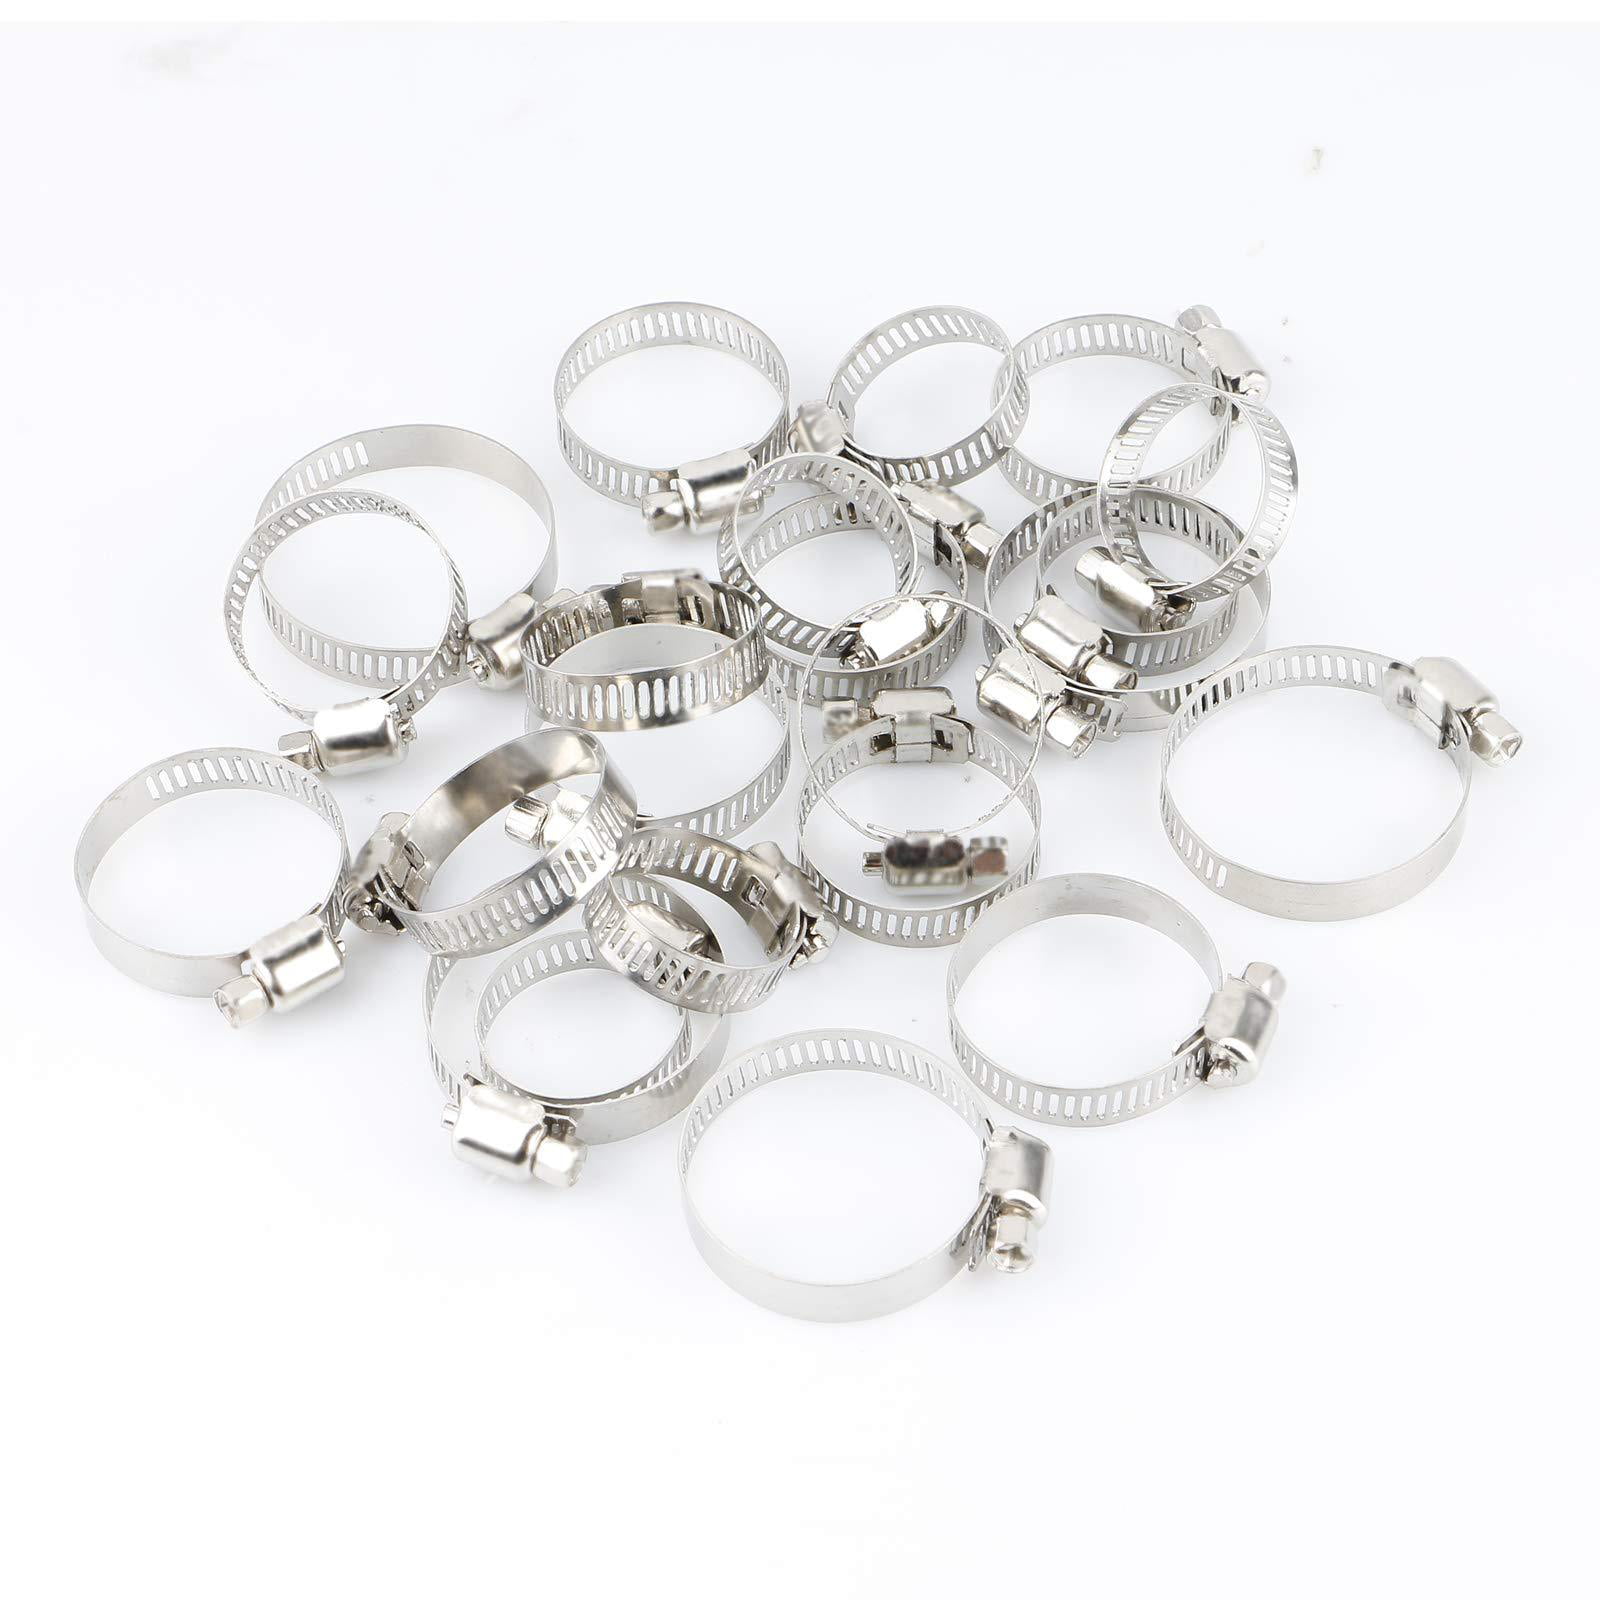 Adjustable Hose Clamp Stainless Steel Fuel Line Worm Gear Clip Kit 60PCS 